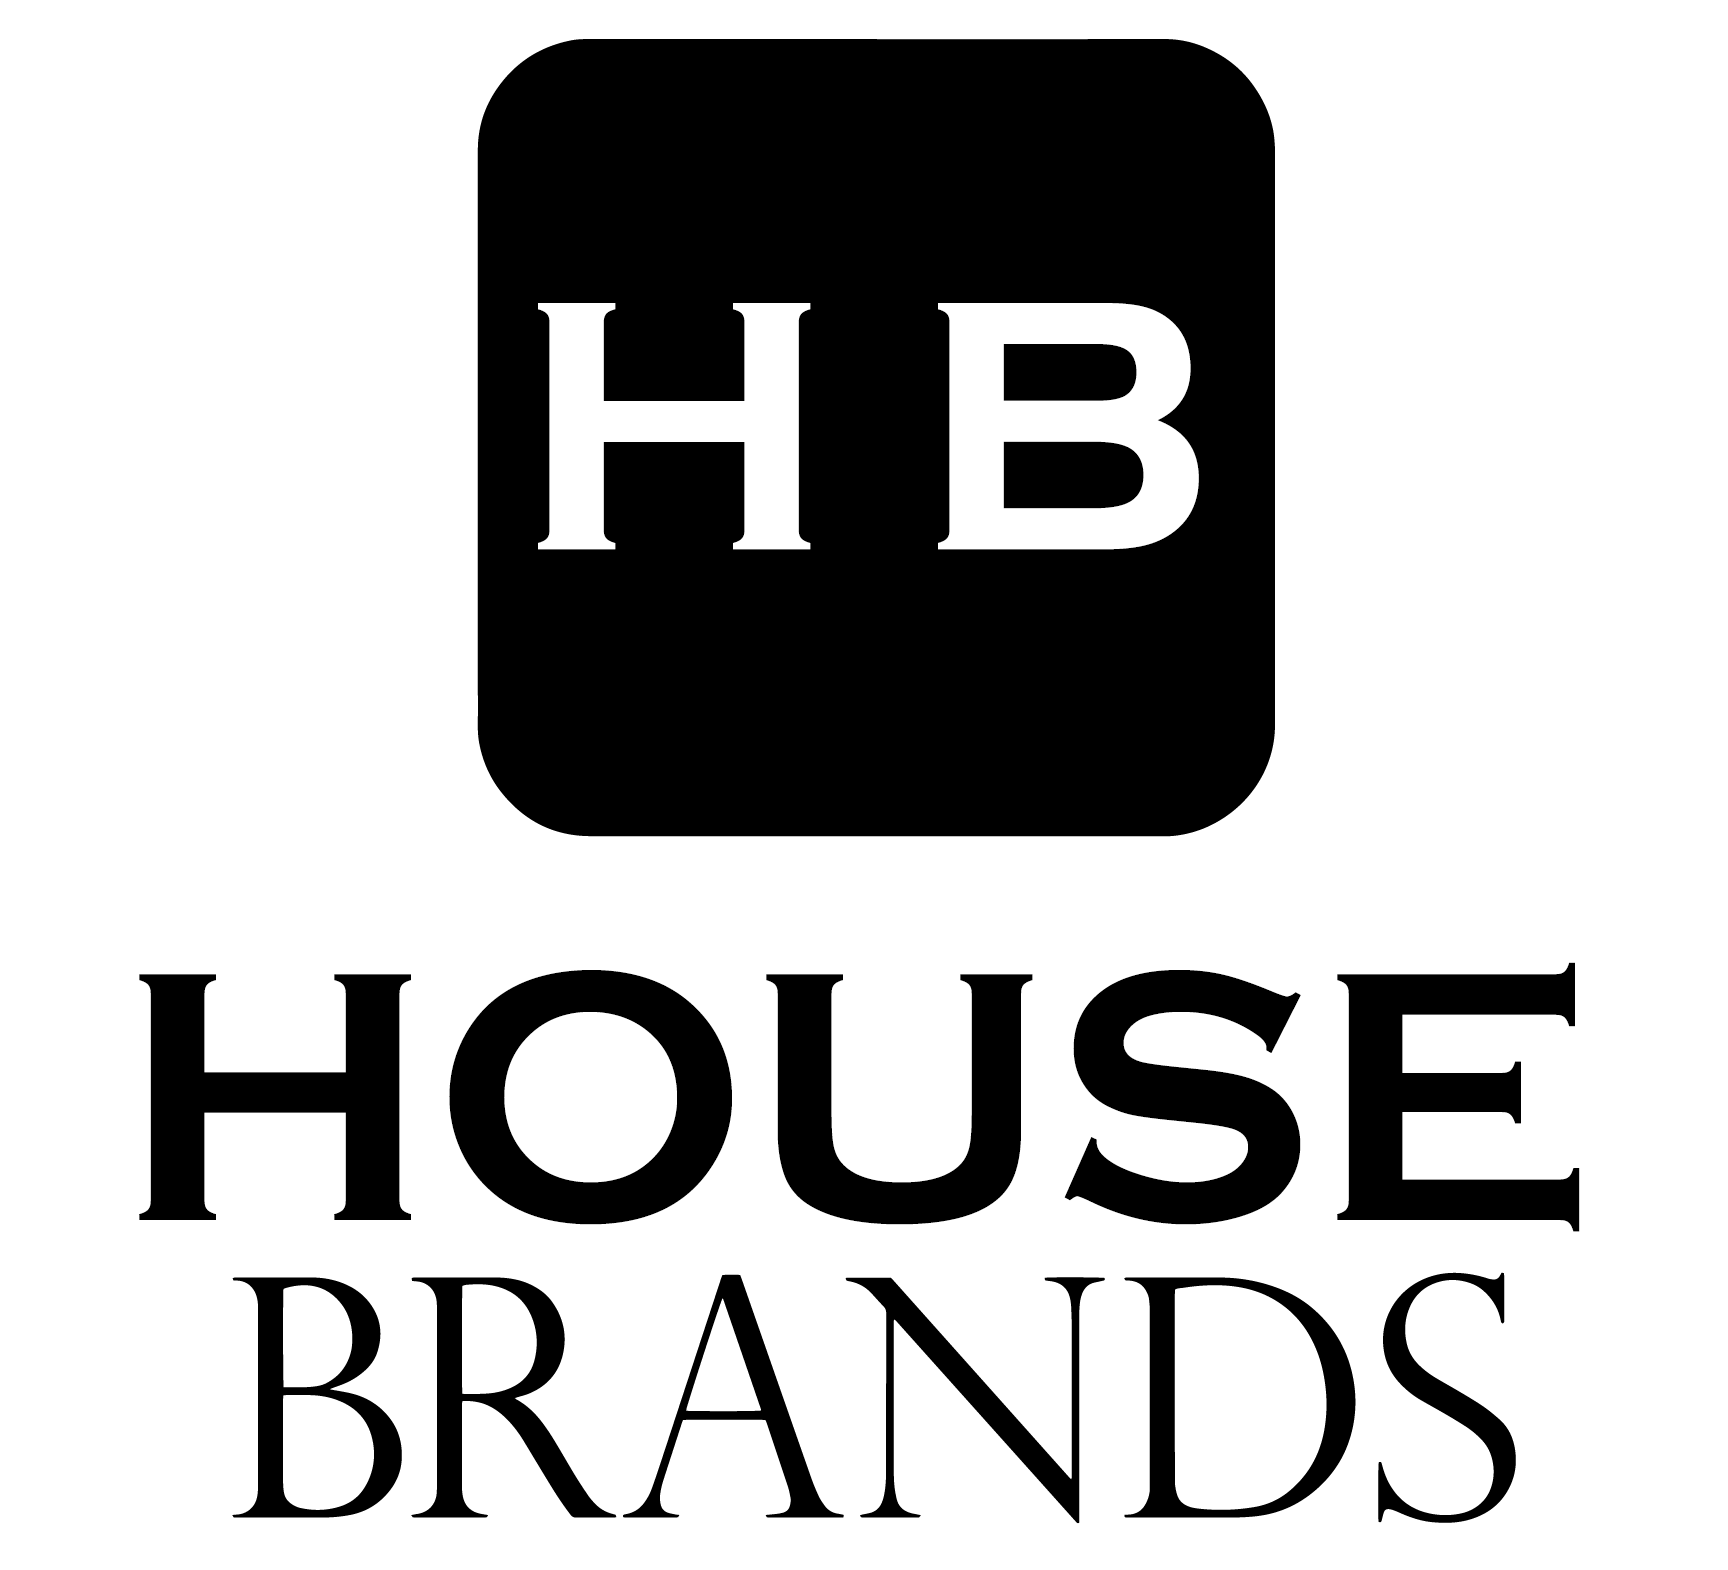 HOUSE BRANDS